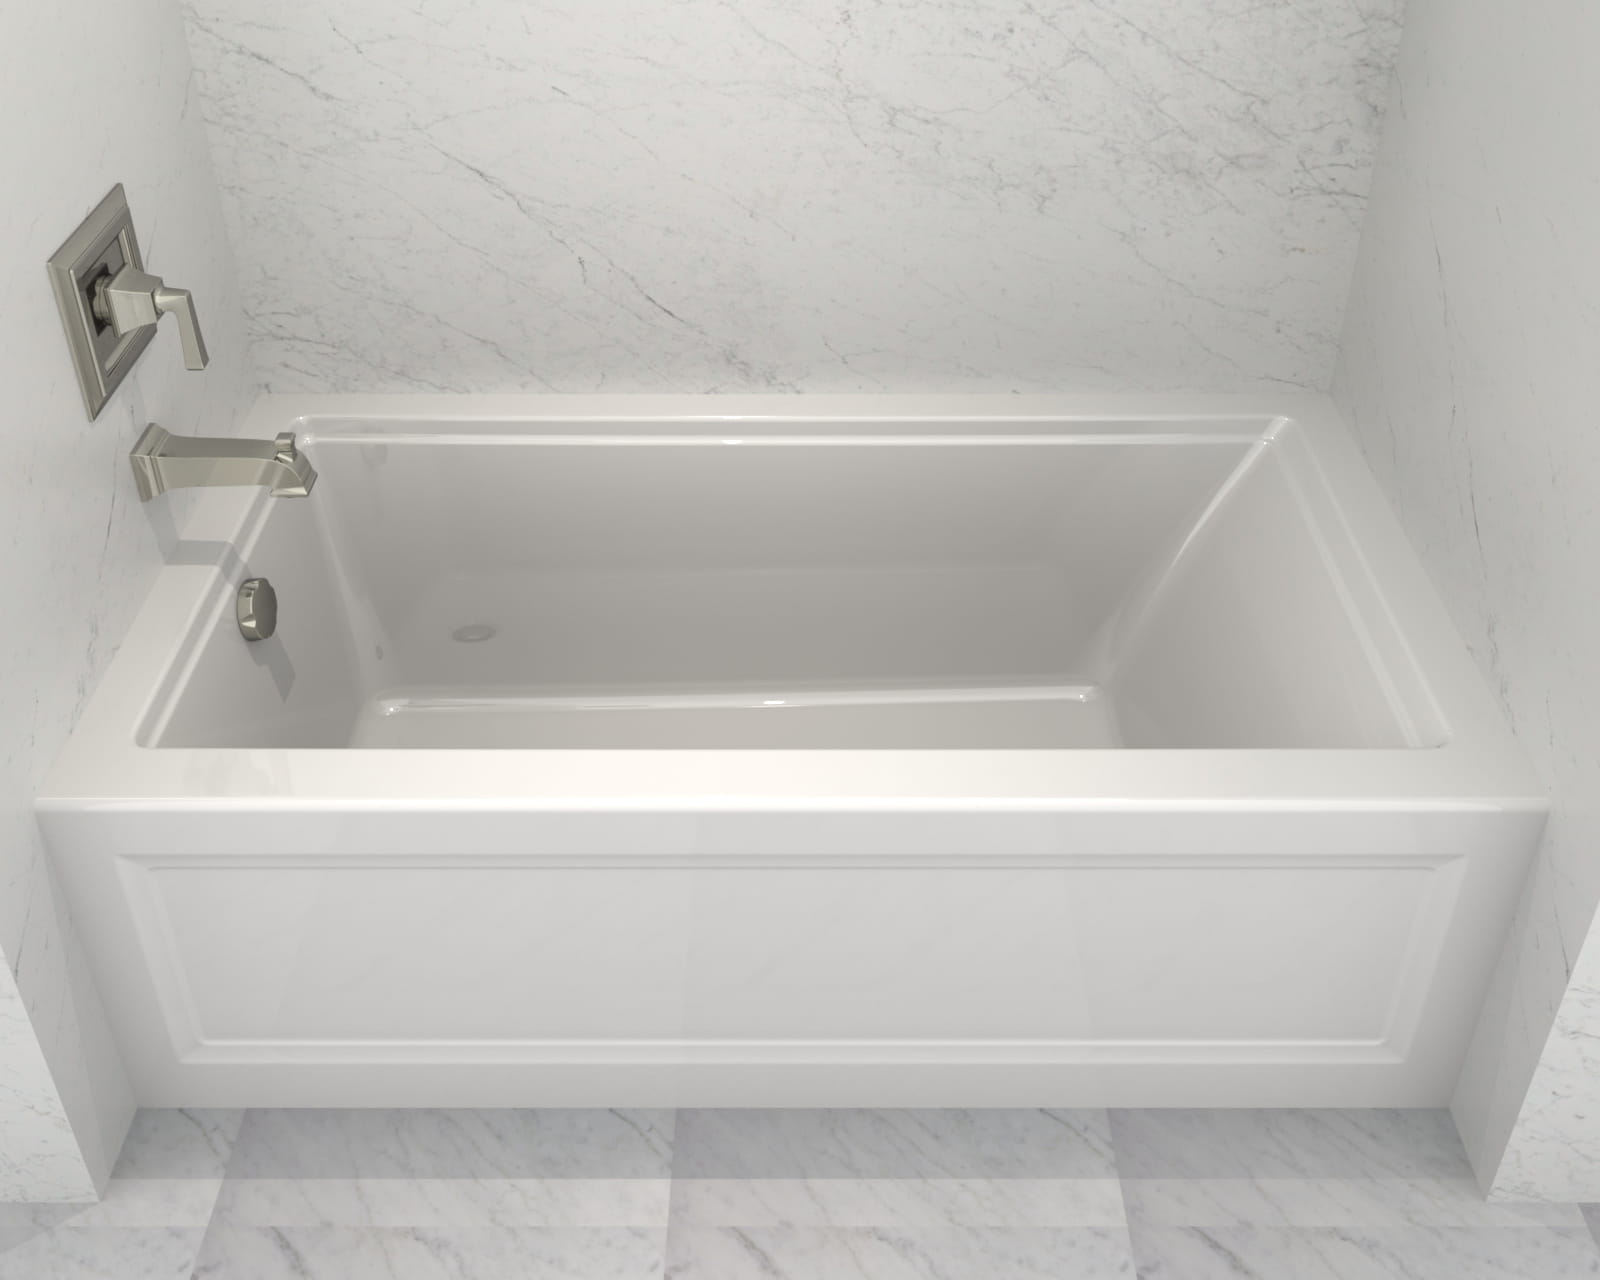 Town Square S 60 x 32 Inch Integral Apron Bathtub With Right Hand Outlet WHITE